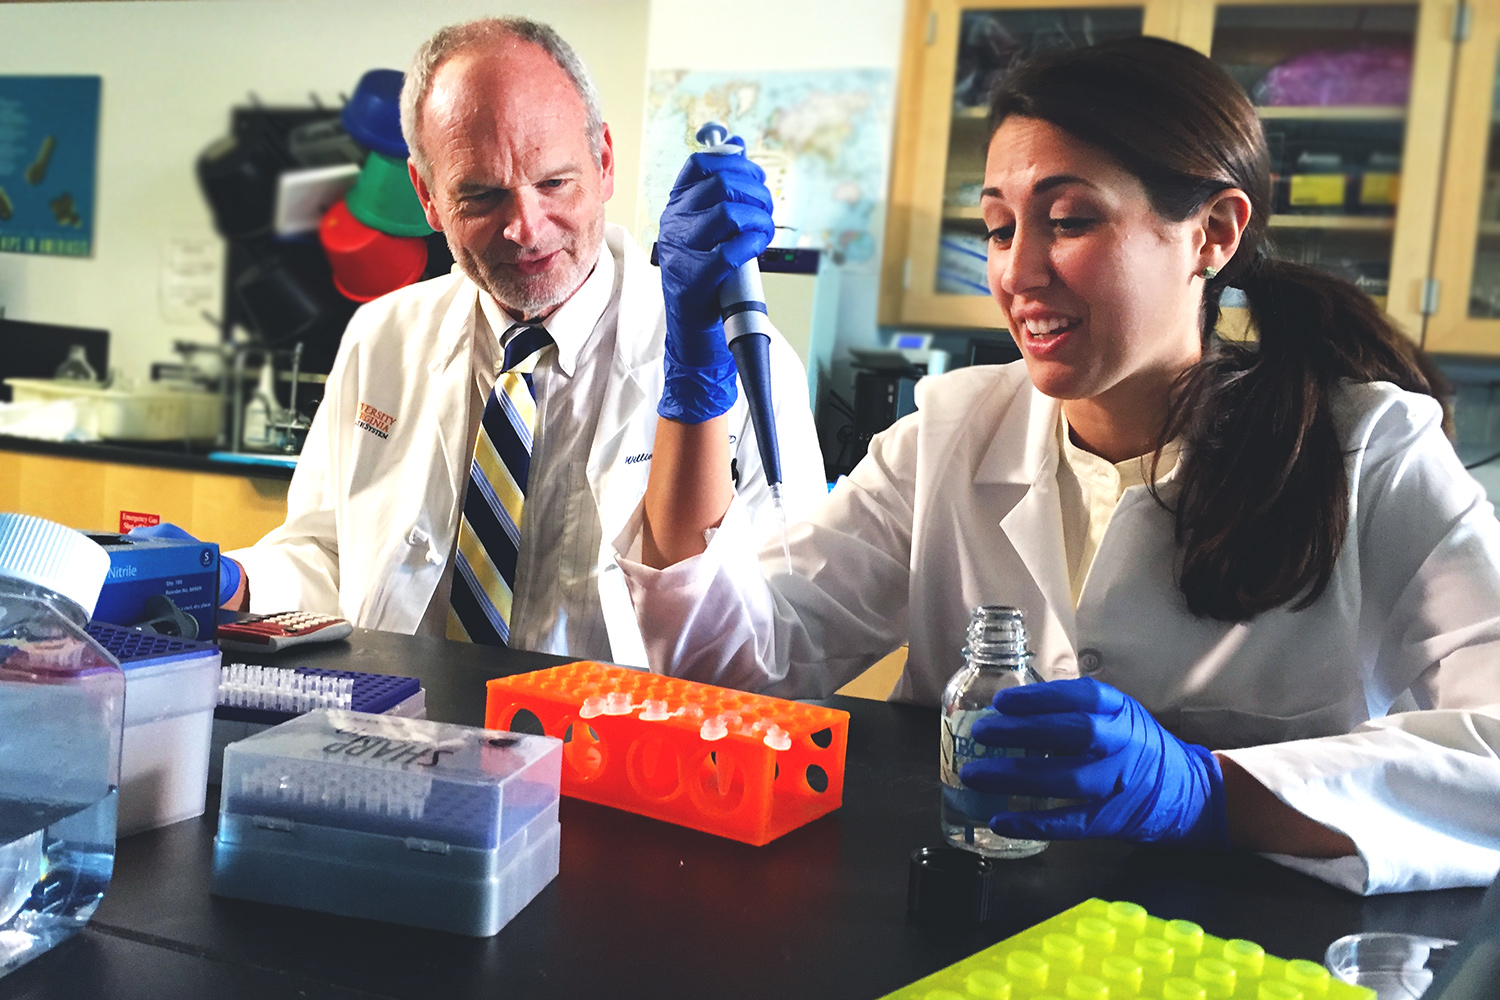 Dr. Bill Petri, left, and Erica L. Buonomo working in a lab together